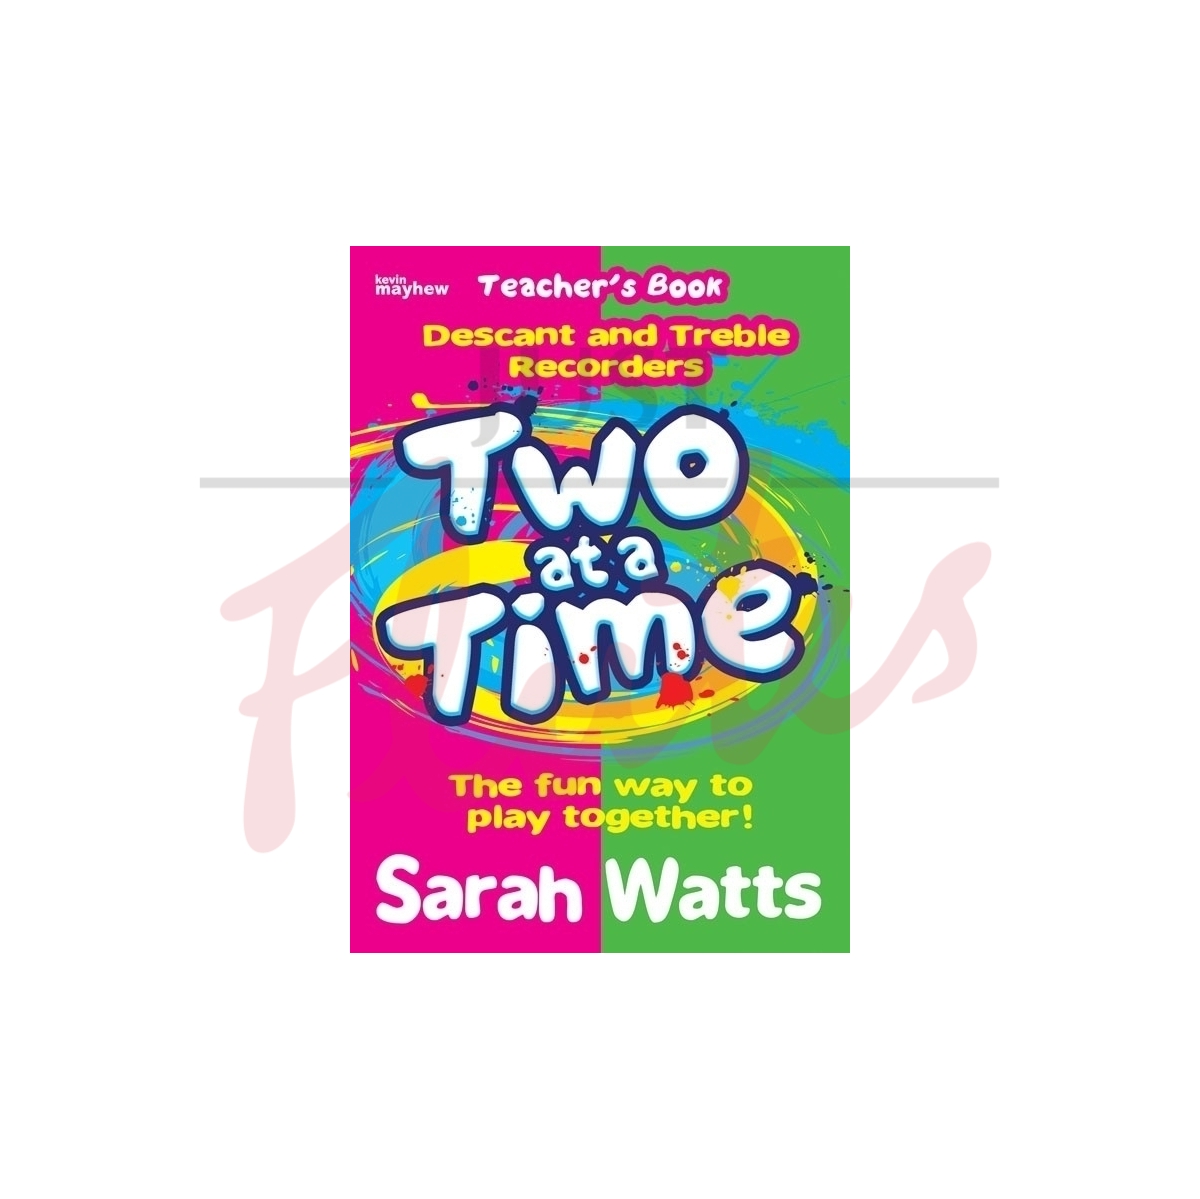 Two at a Time Descant and Treble Recorder -Teacher's Book